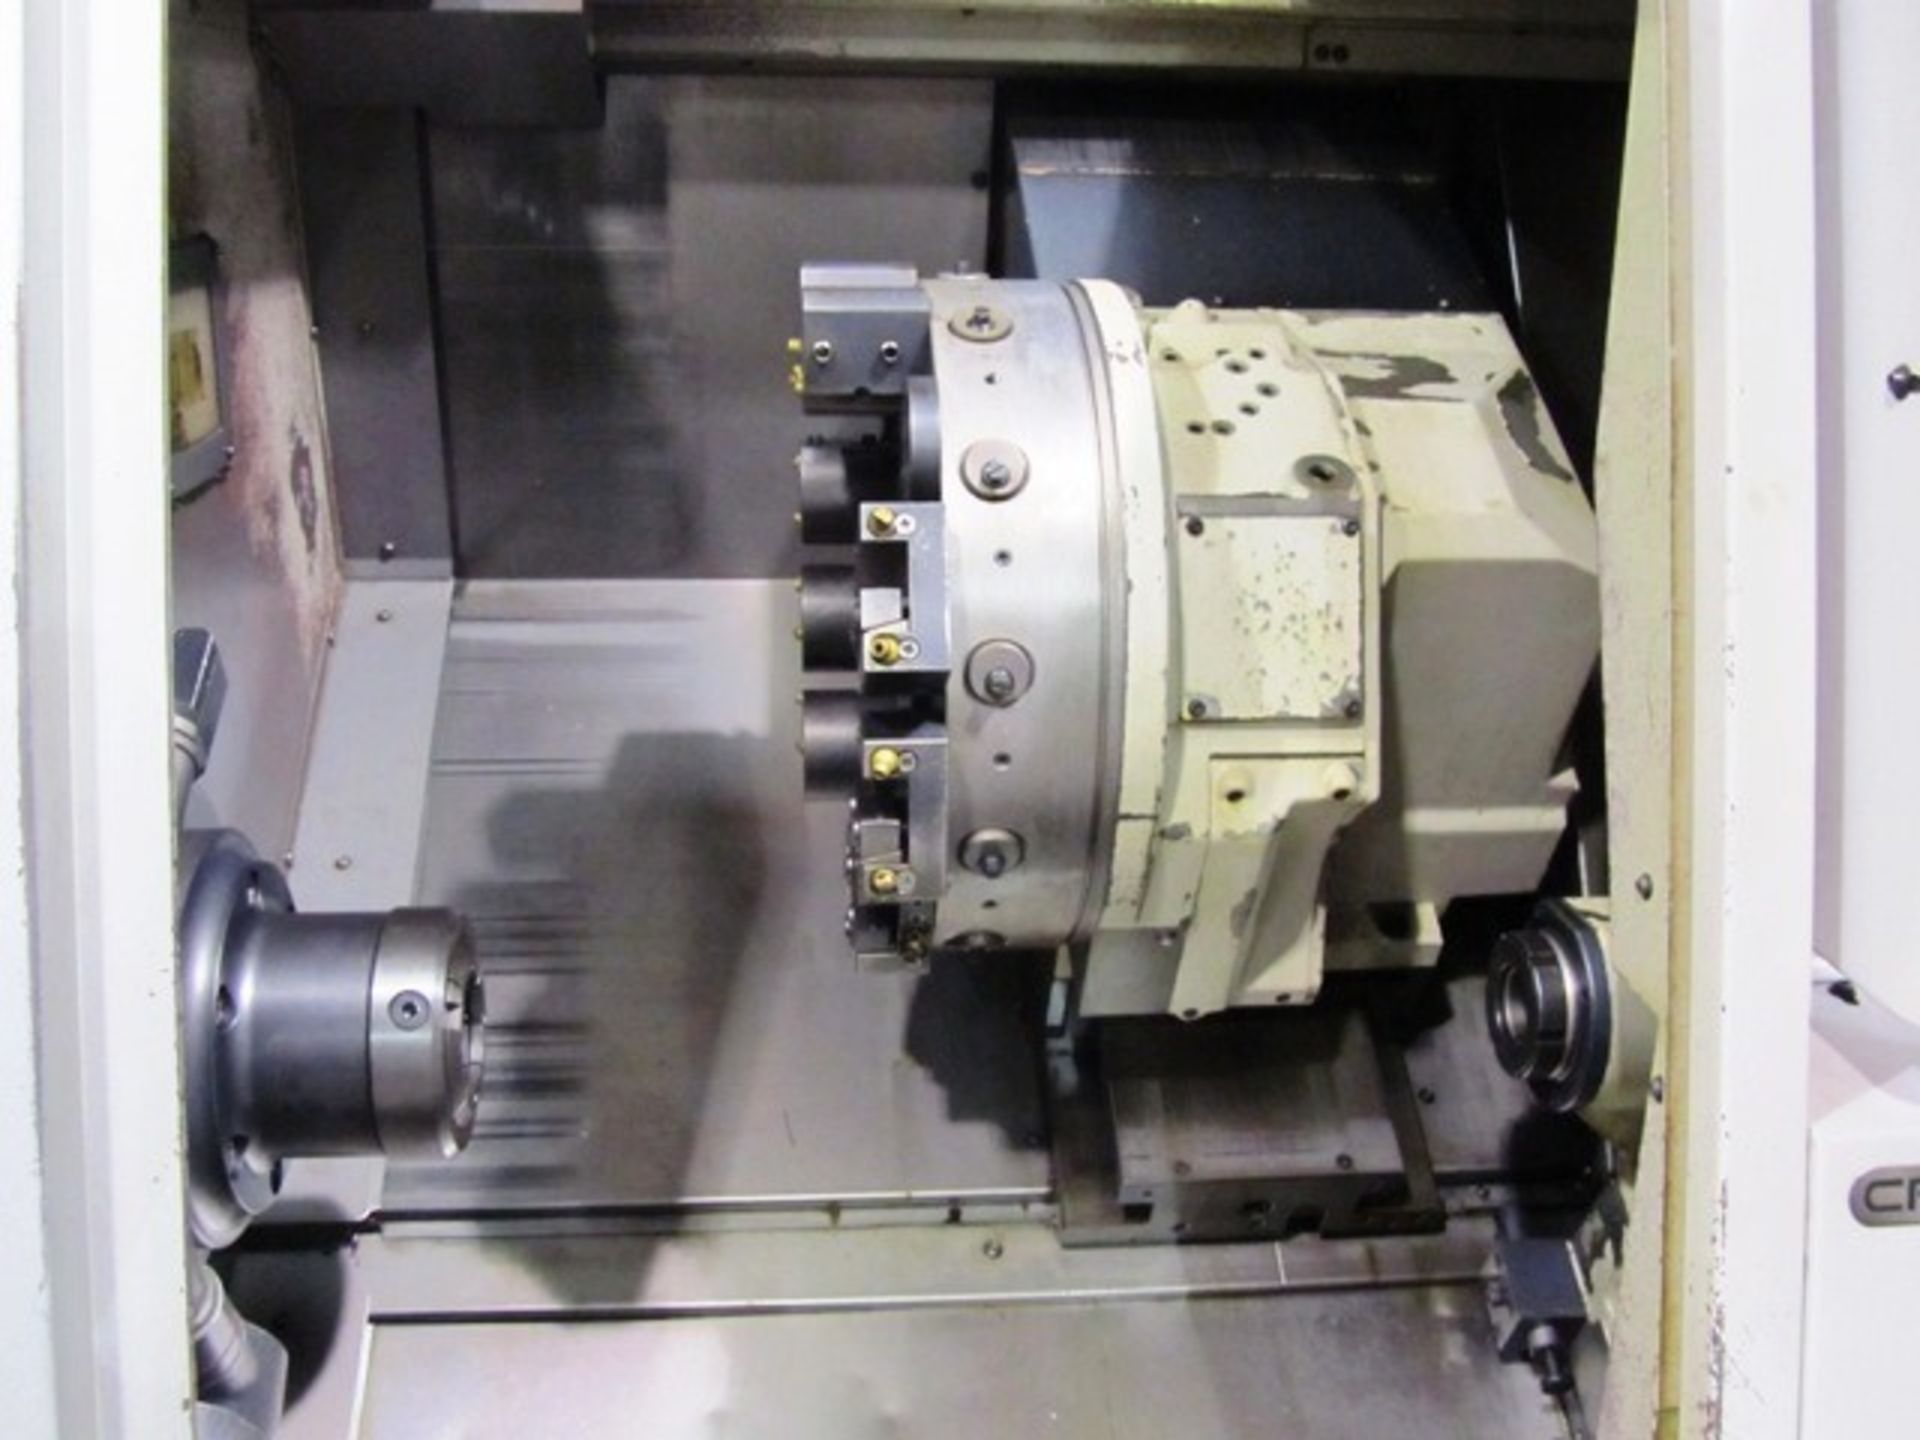 Okuma Model Captain L370M CNC Turning Center with Milling, `C' Axis, 12 Station Turret, Collet - Image 2 of 7